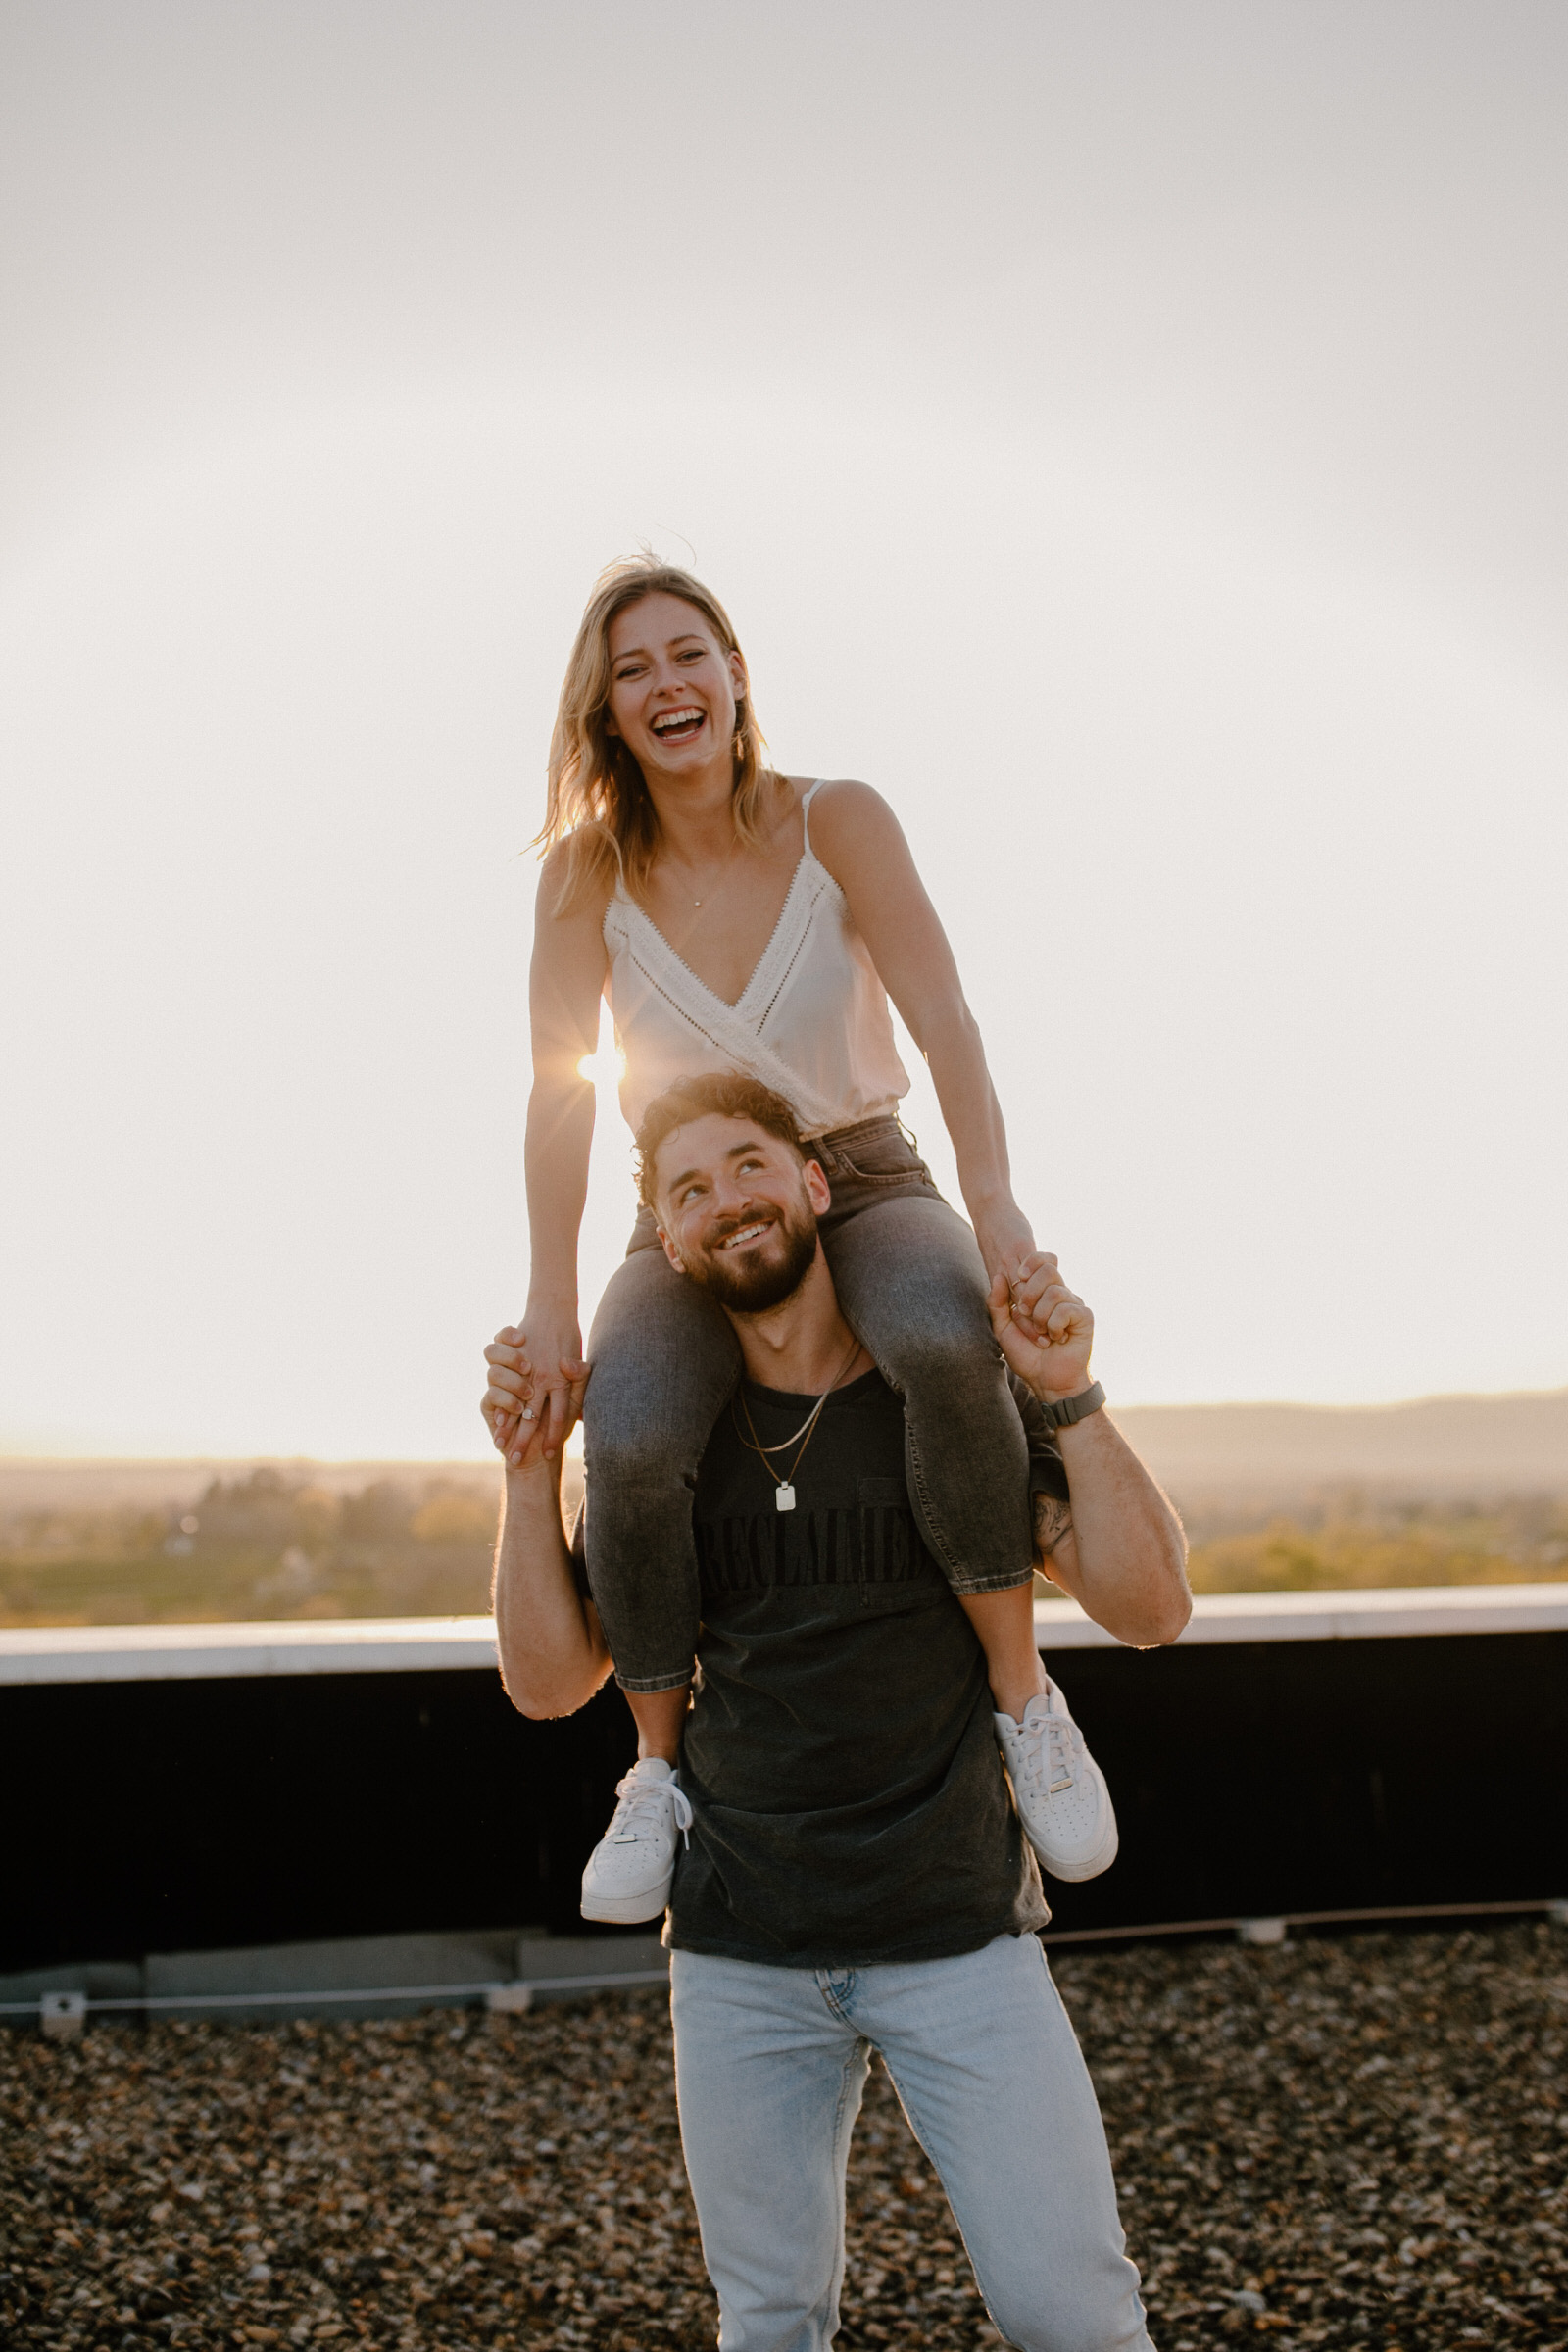 Rooftop Sunsets With You by Lana Isabella Photography